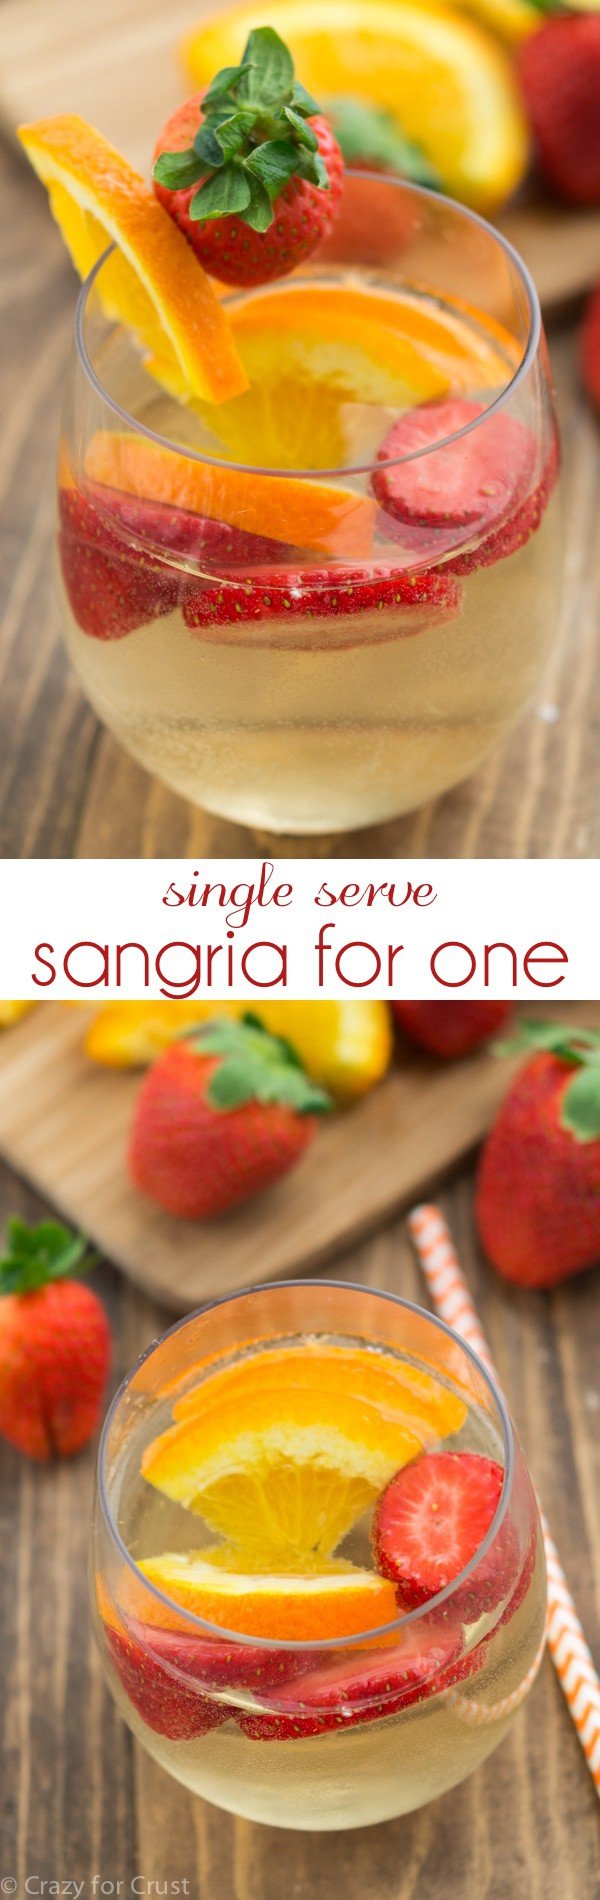 Single Serve Sangria makes one serving of summer sangria. It's the perfect fast and easy cocktail recipe!